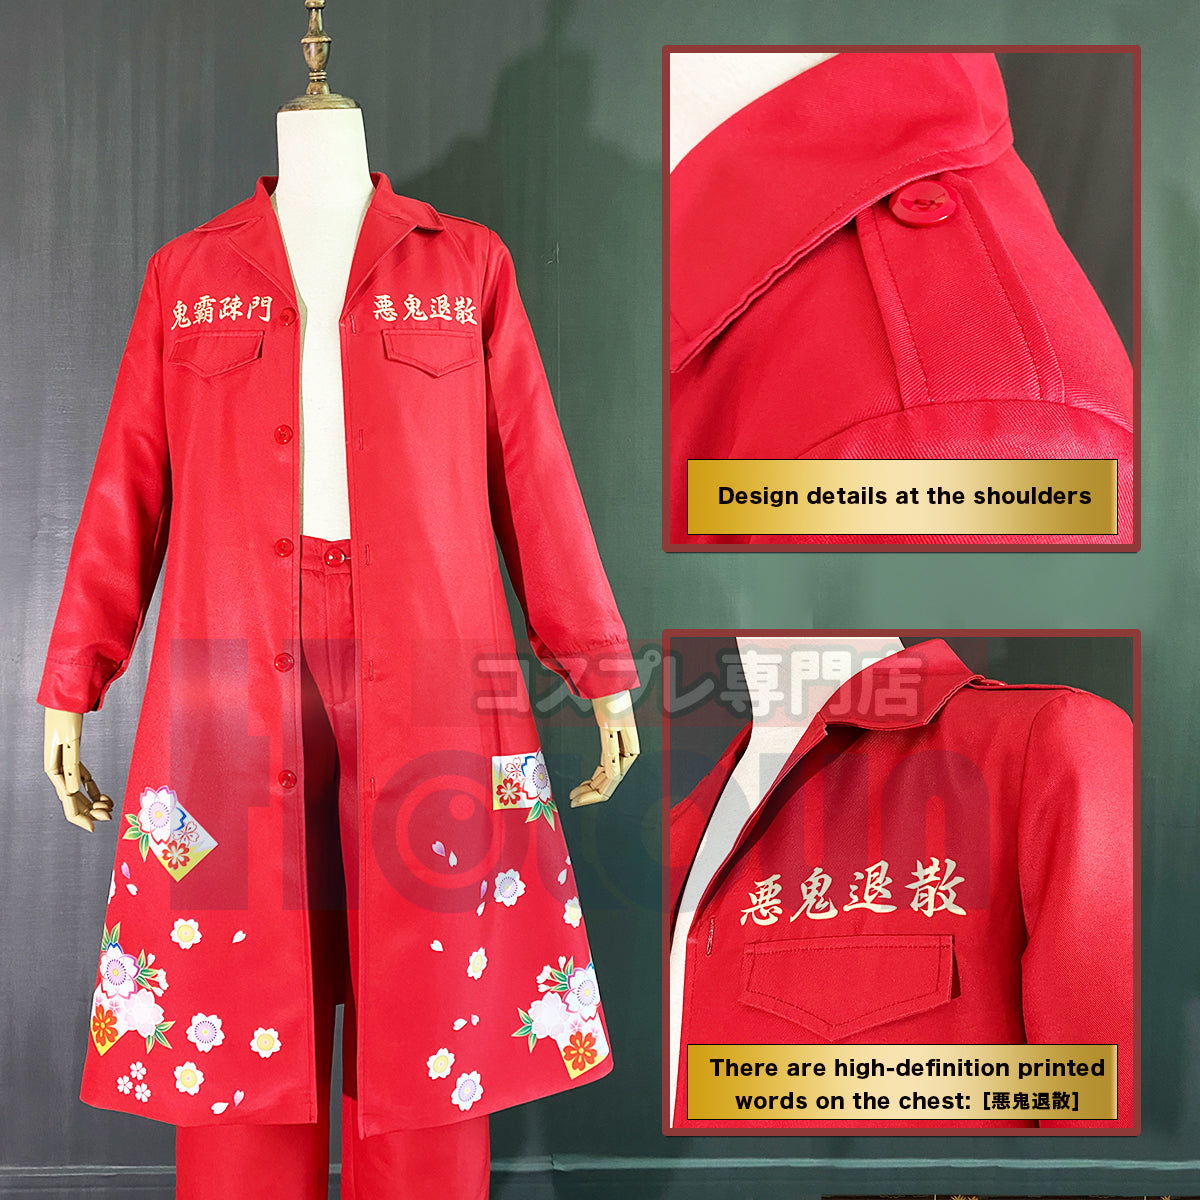 HOLOUN Bosozoku Cosplay Costume Special Attack Red Color Uniform Coat Chinese Characters Japanese Festival Halloween Christmas New Year Gift